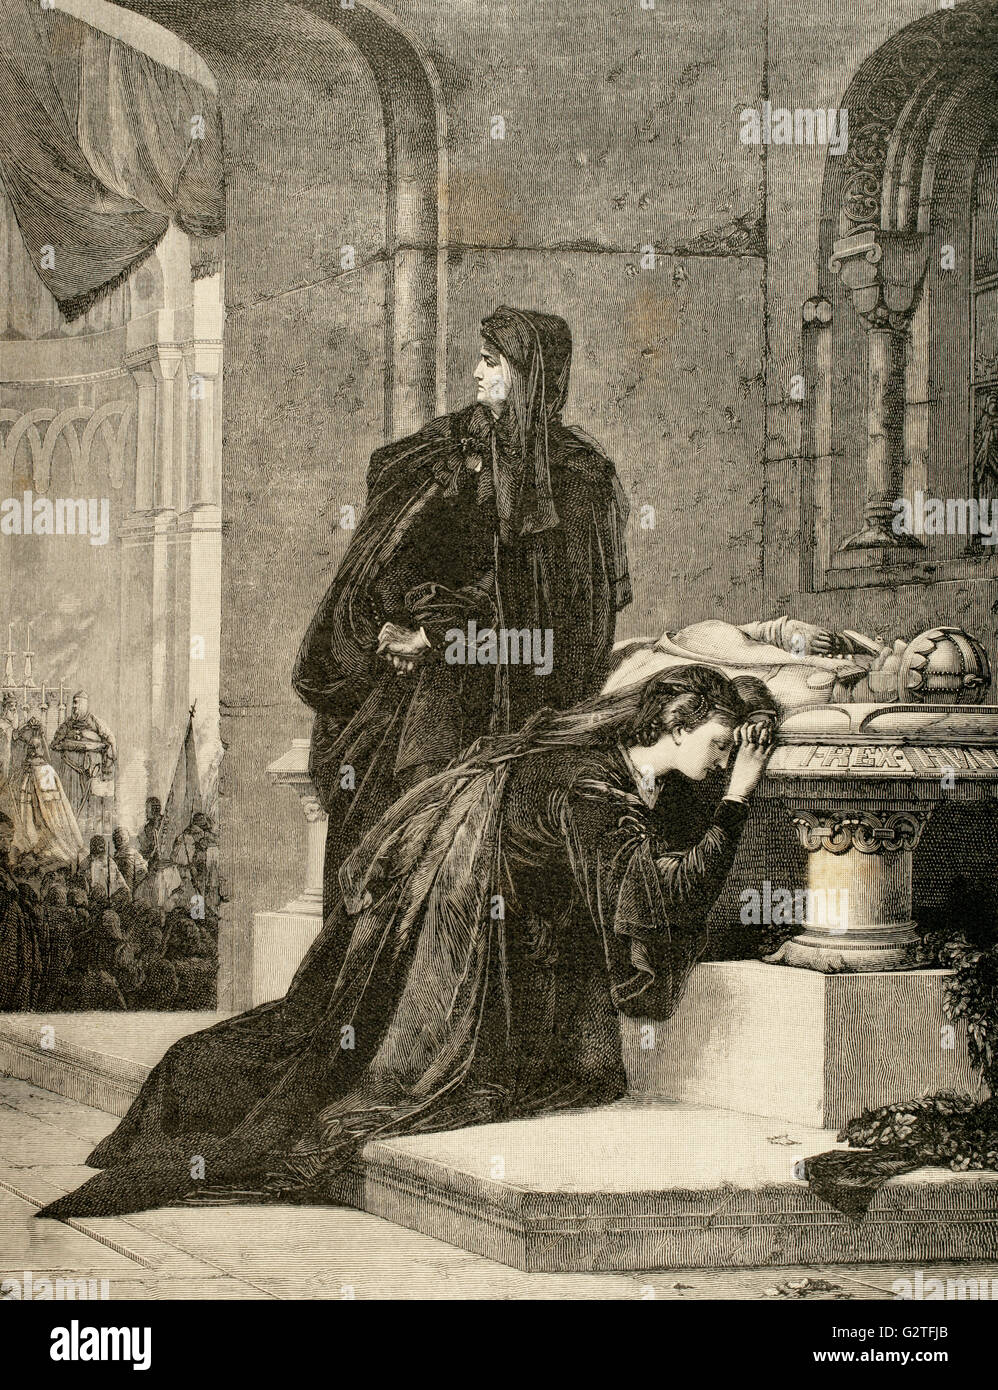 Queen Mary I of Hungary (1371-1395) and his mother Queen consort Elizabeth of Bosnia (1339-1387) mourning at the tomb of her father and husband Louis I of Hungary (1326-1382). Engraving after the painting of A. Liezen-Mayer. 19th century. Stock Photo